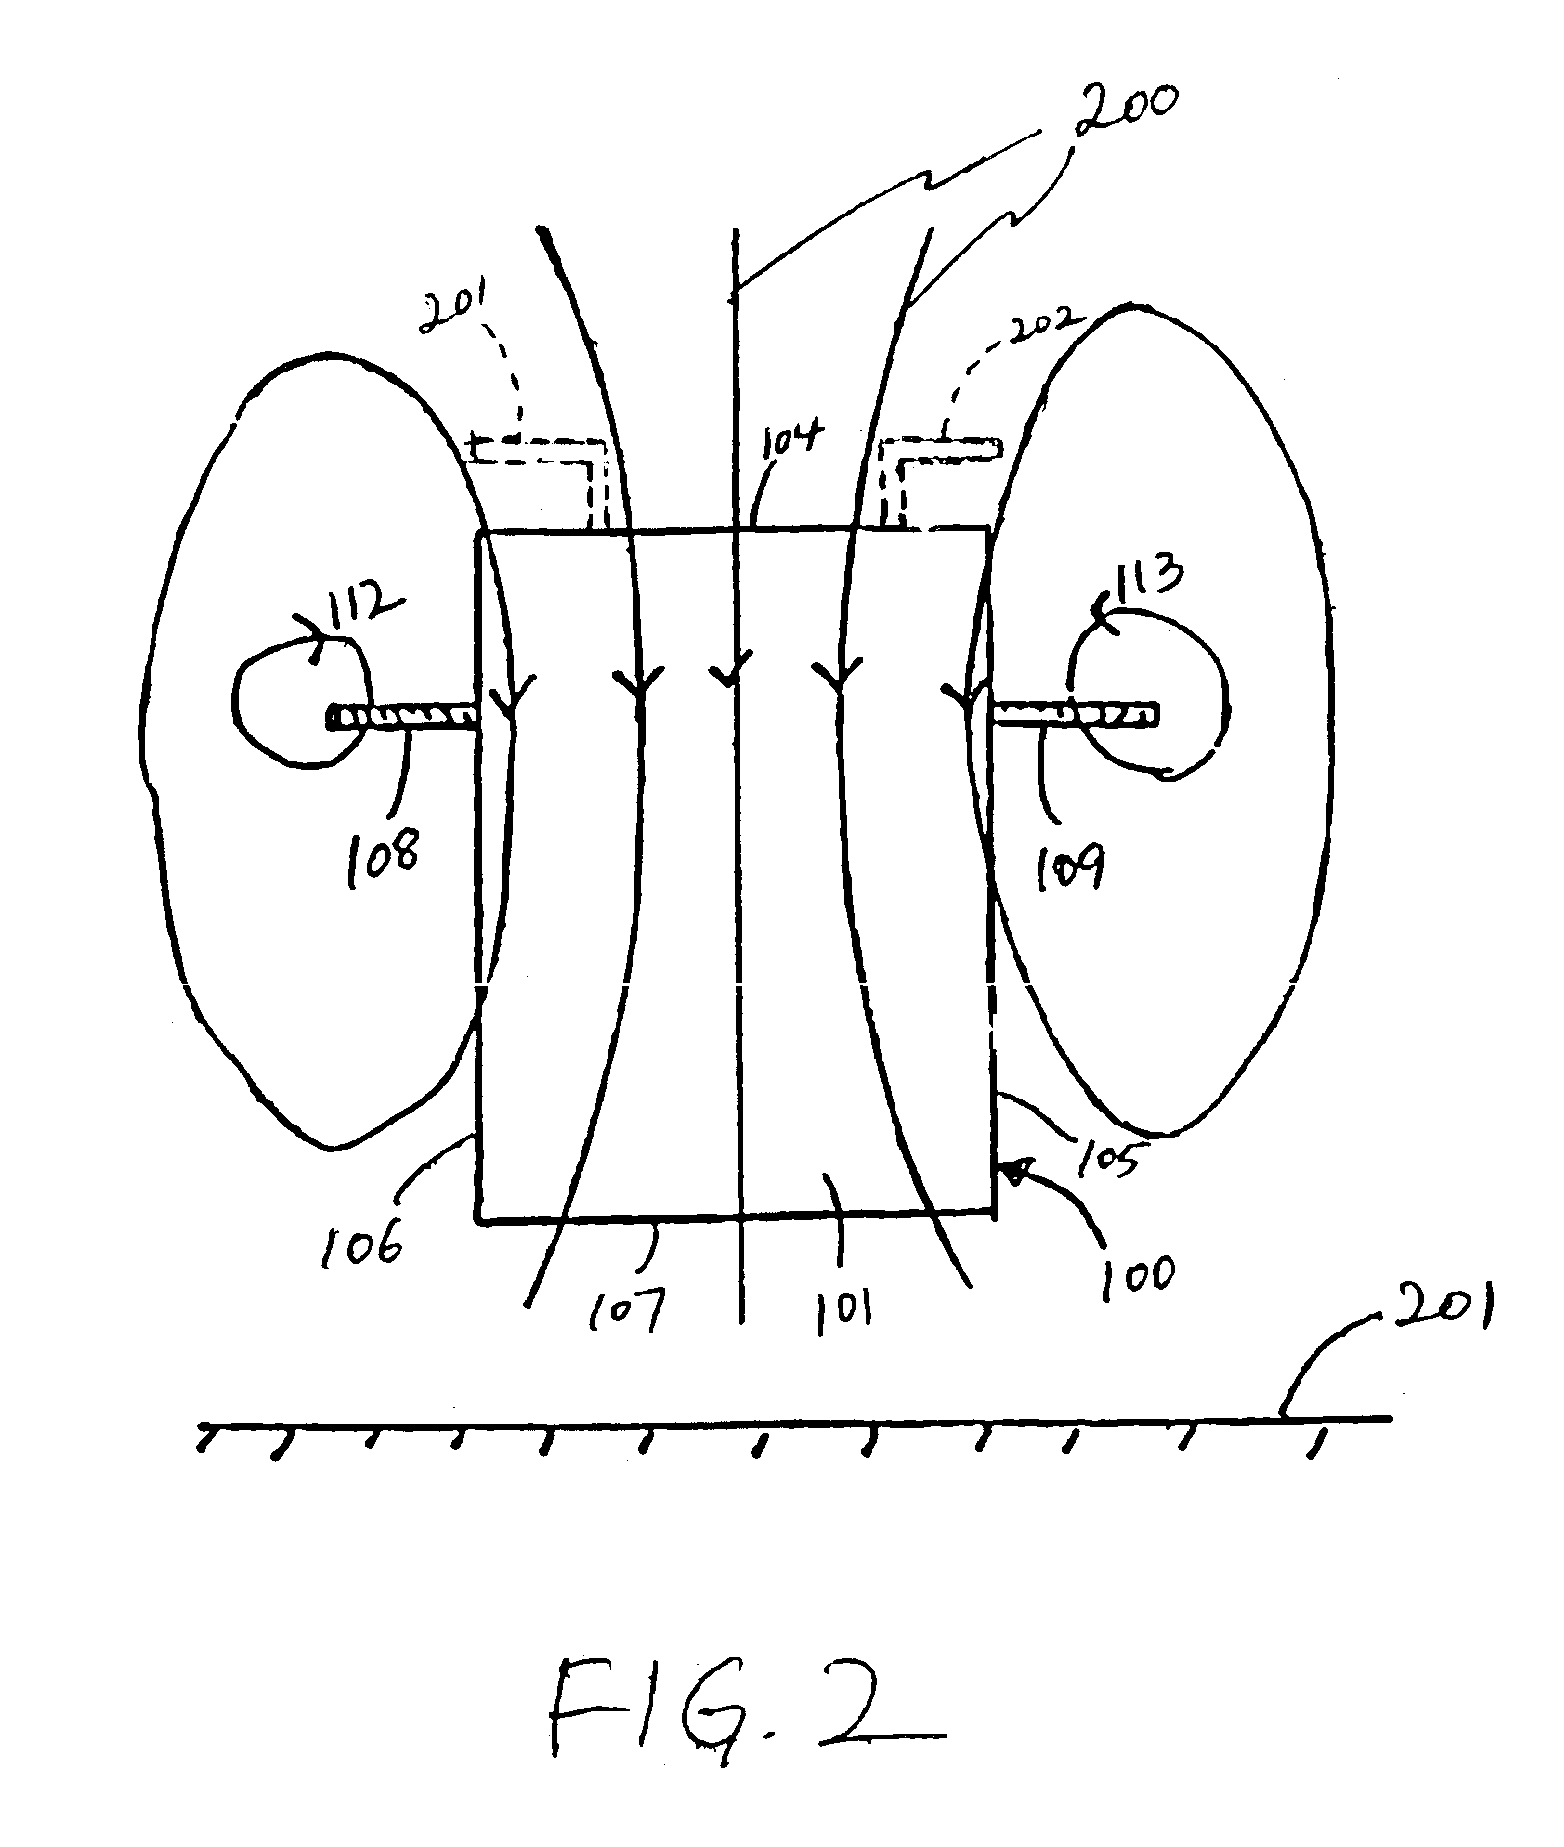 Apparatus and method for reducing drag of a bluff body in ground effect using counter-rotating vortex pairs